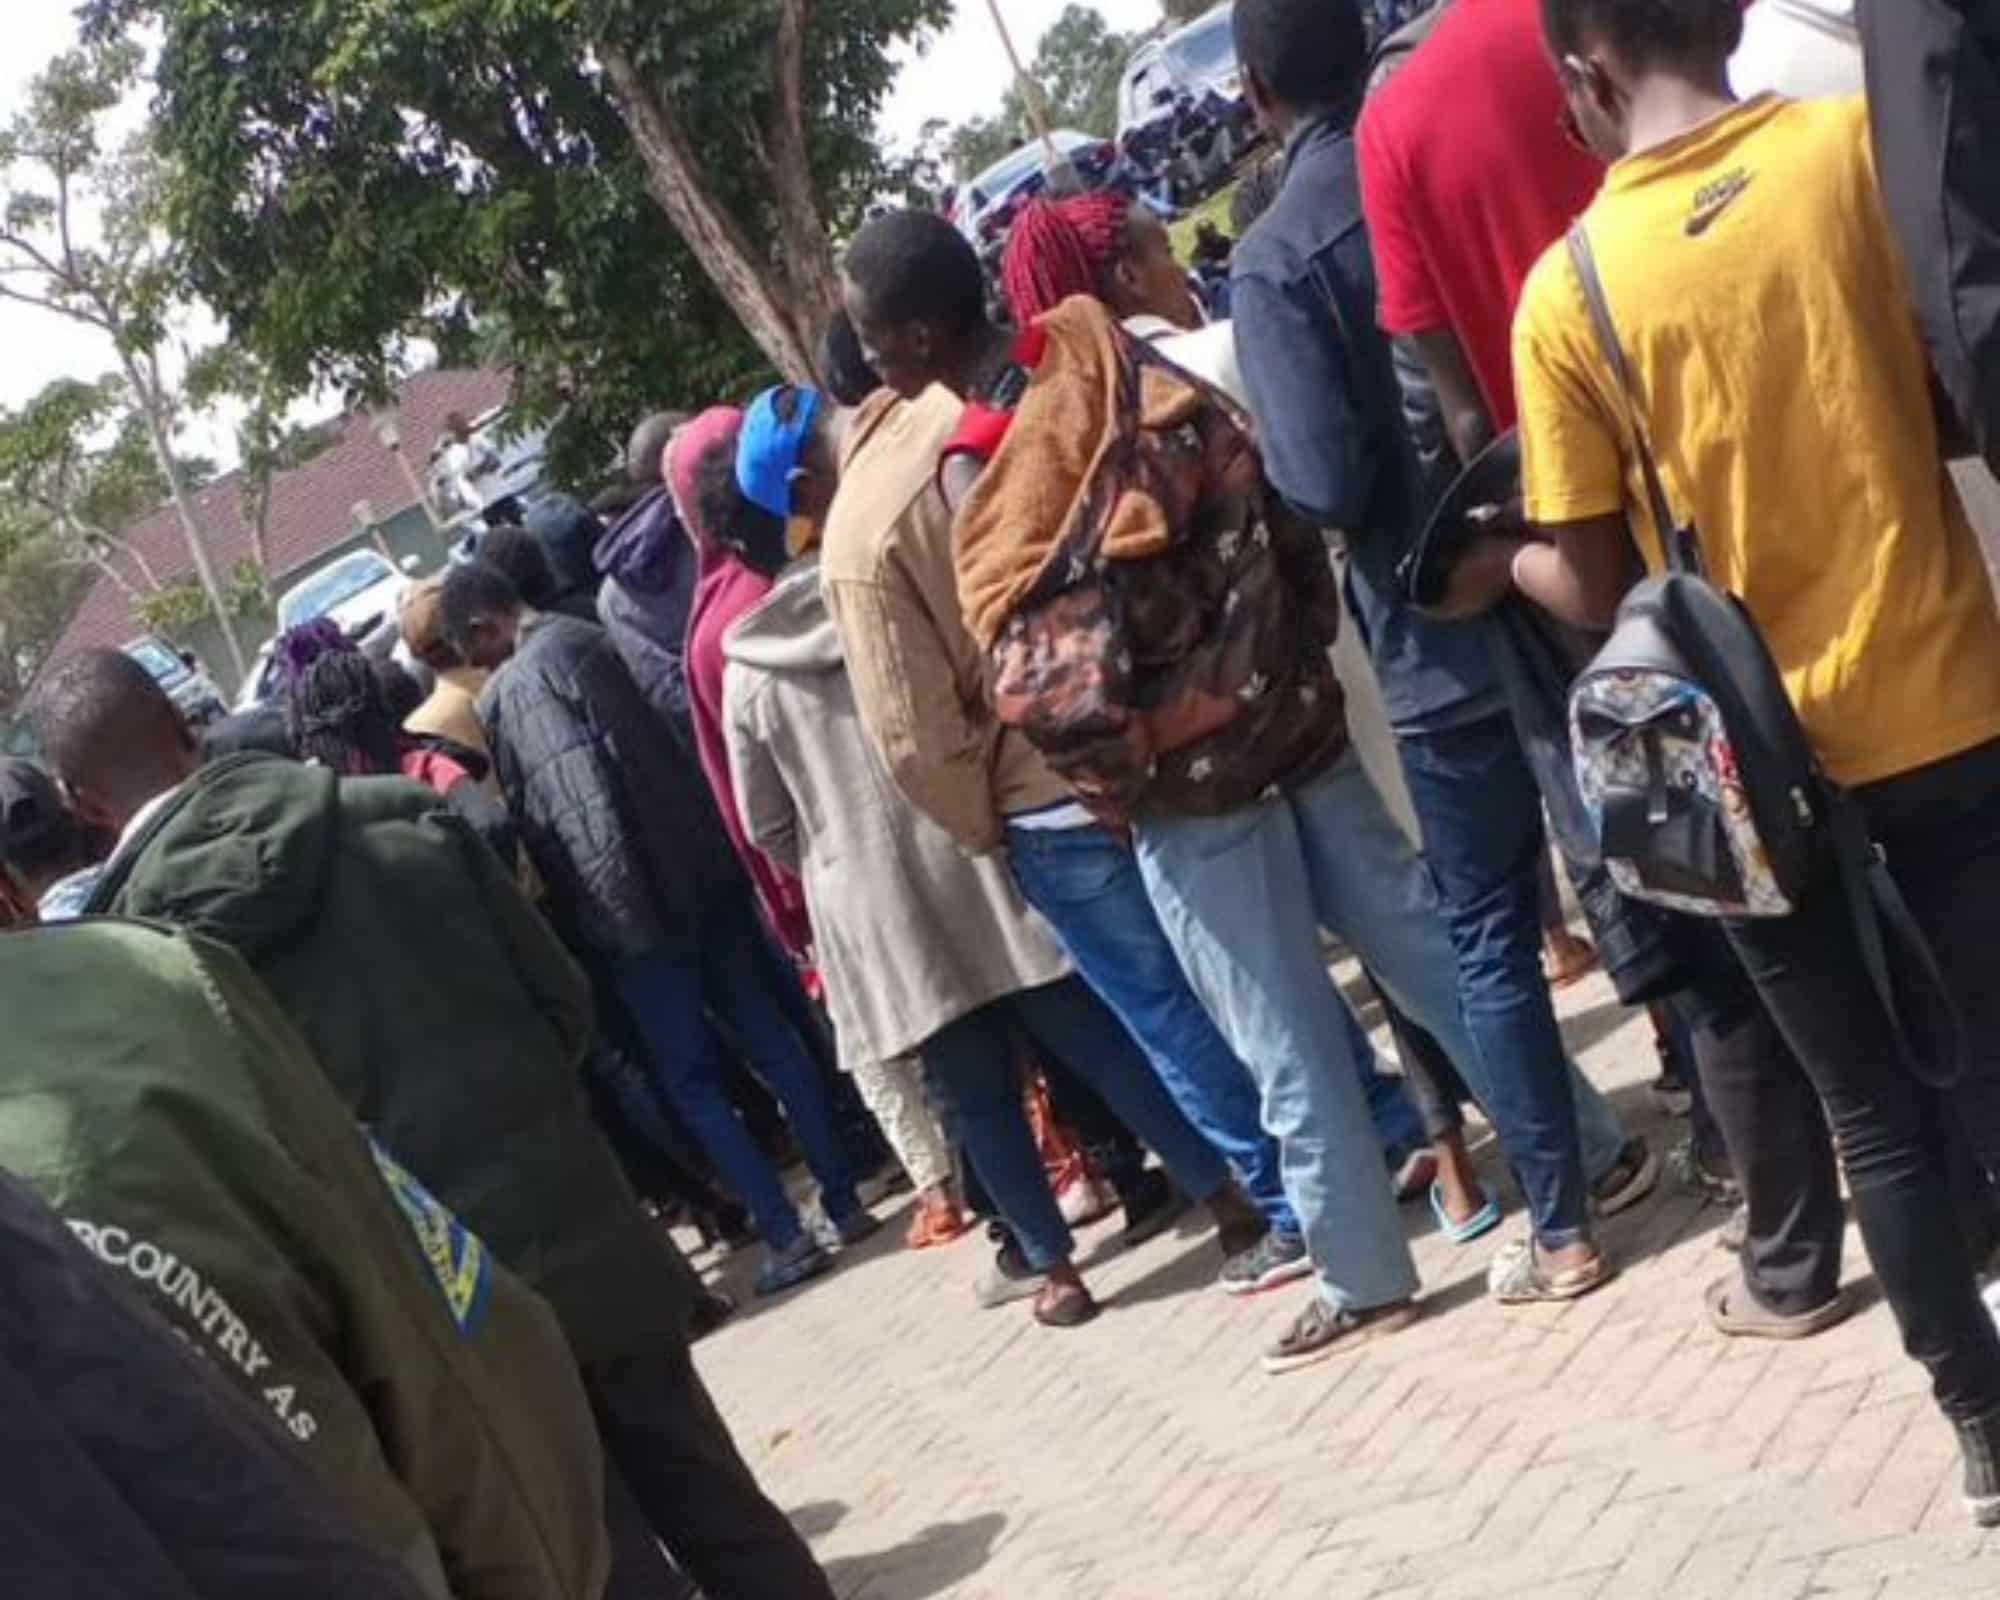 Queue in front of a Worldcoin orb at China Square in Nairobi - Photo by Eldad Kanawa